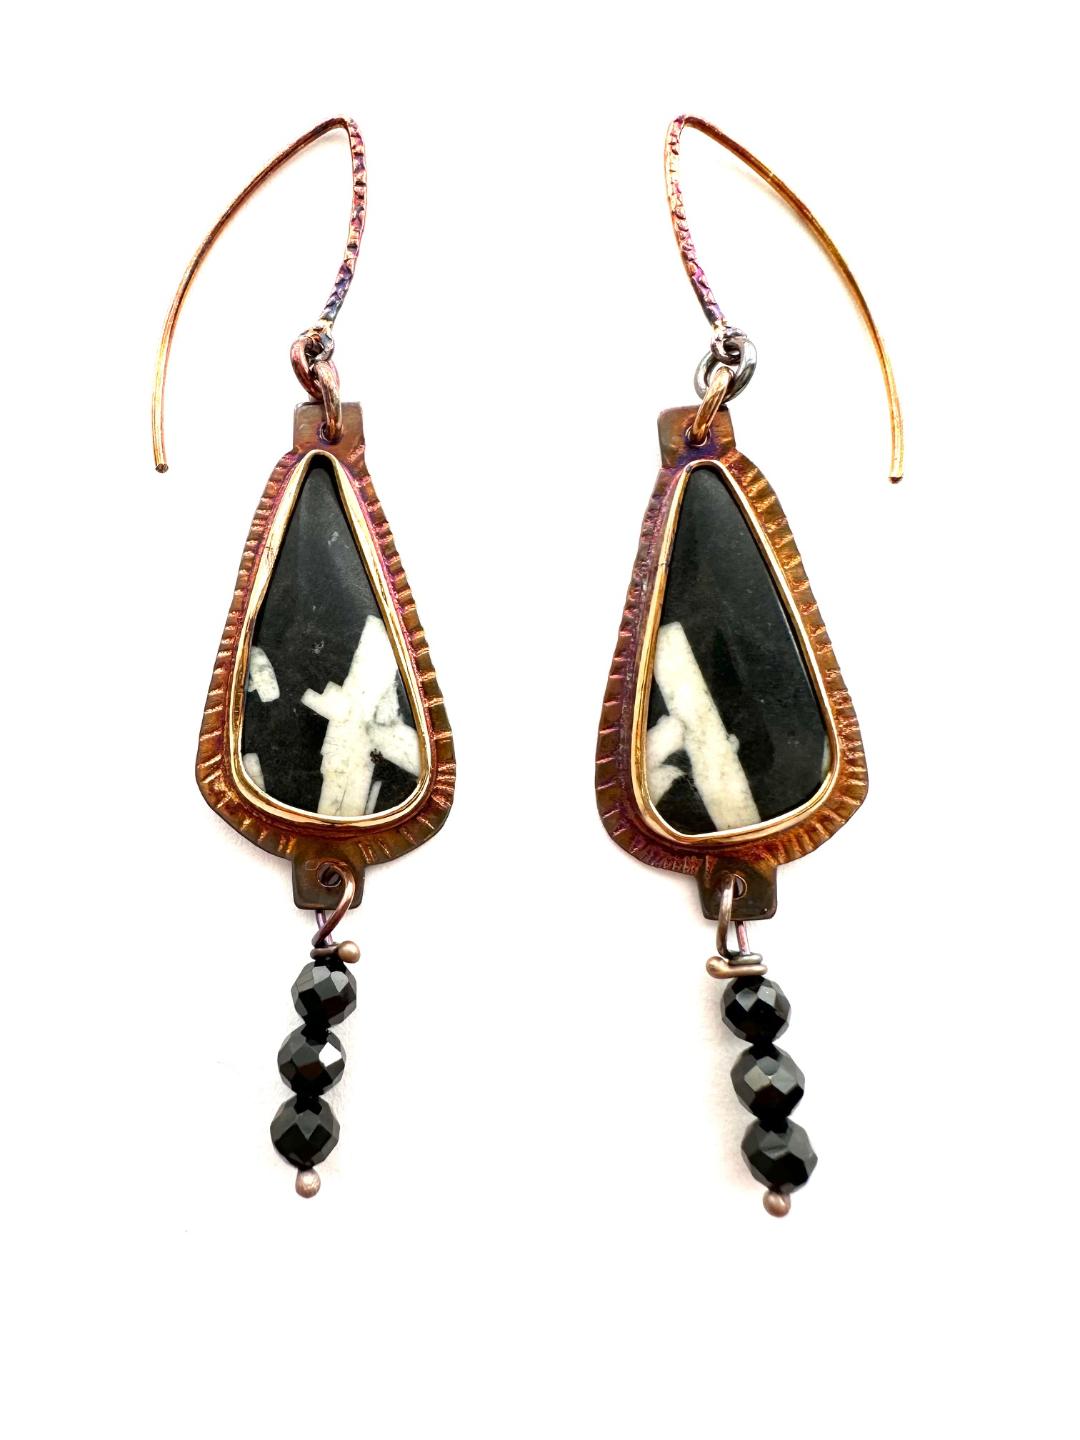 Sterling Silver, Fine Silver Bezels, and Chinese Writing Stone Earrings with Onyx Bead Dangles and Sterling French Hooks